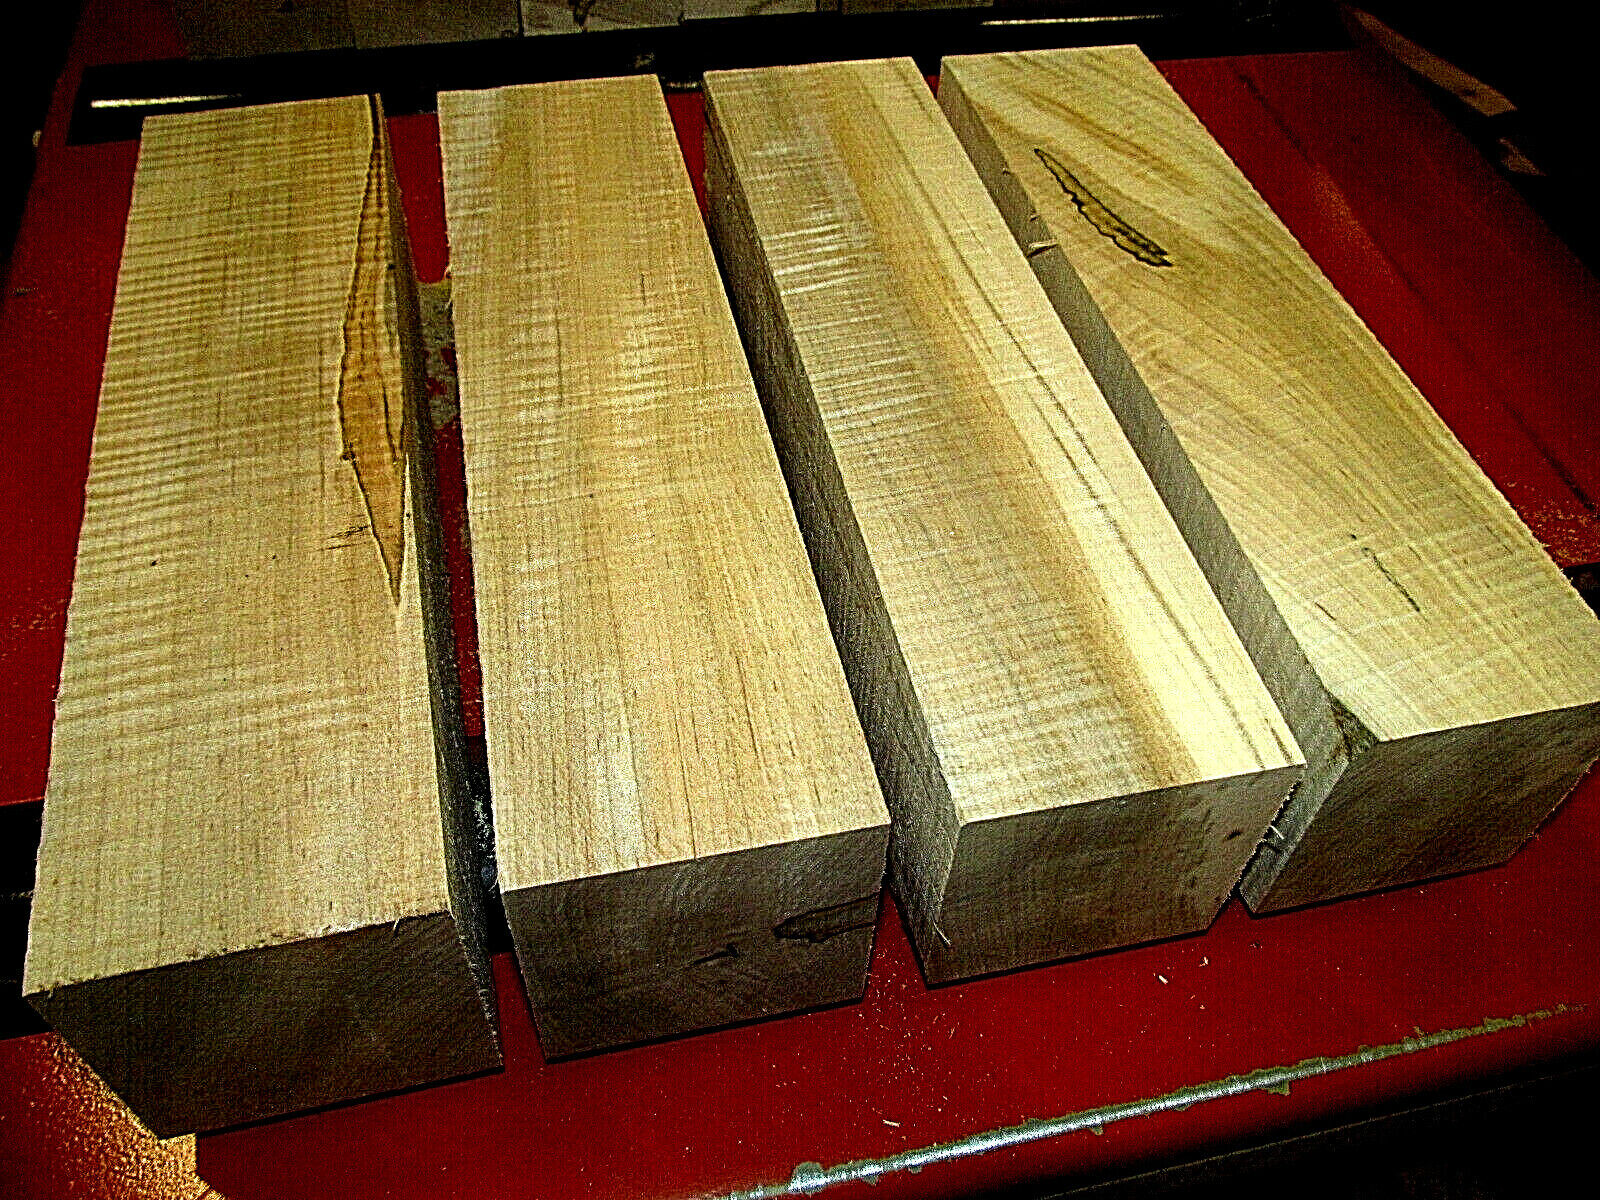 FOUR (4) CURLY MAPLE TURNING BLOCKS LUMBER LATHE WOOD BLANKS 3" X 3" X 12" Green Valley Wood Products